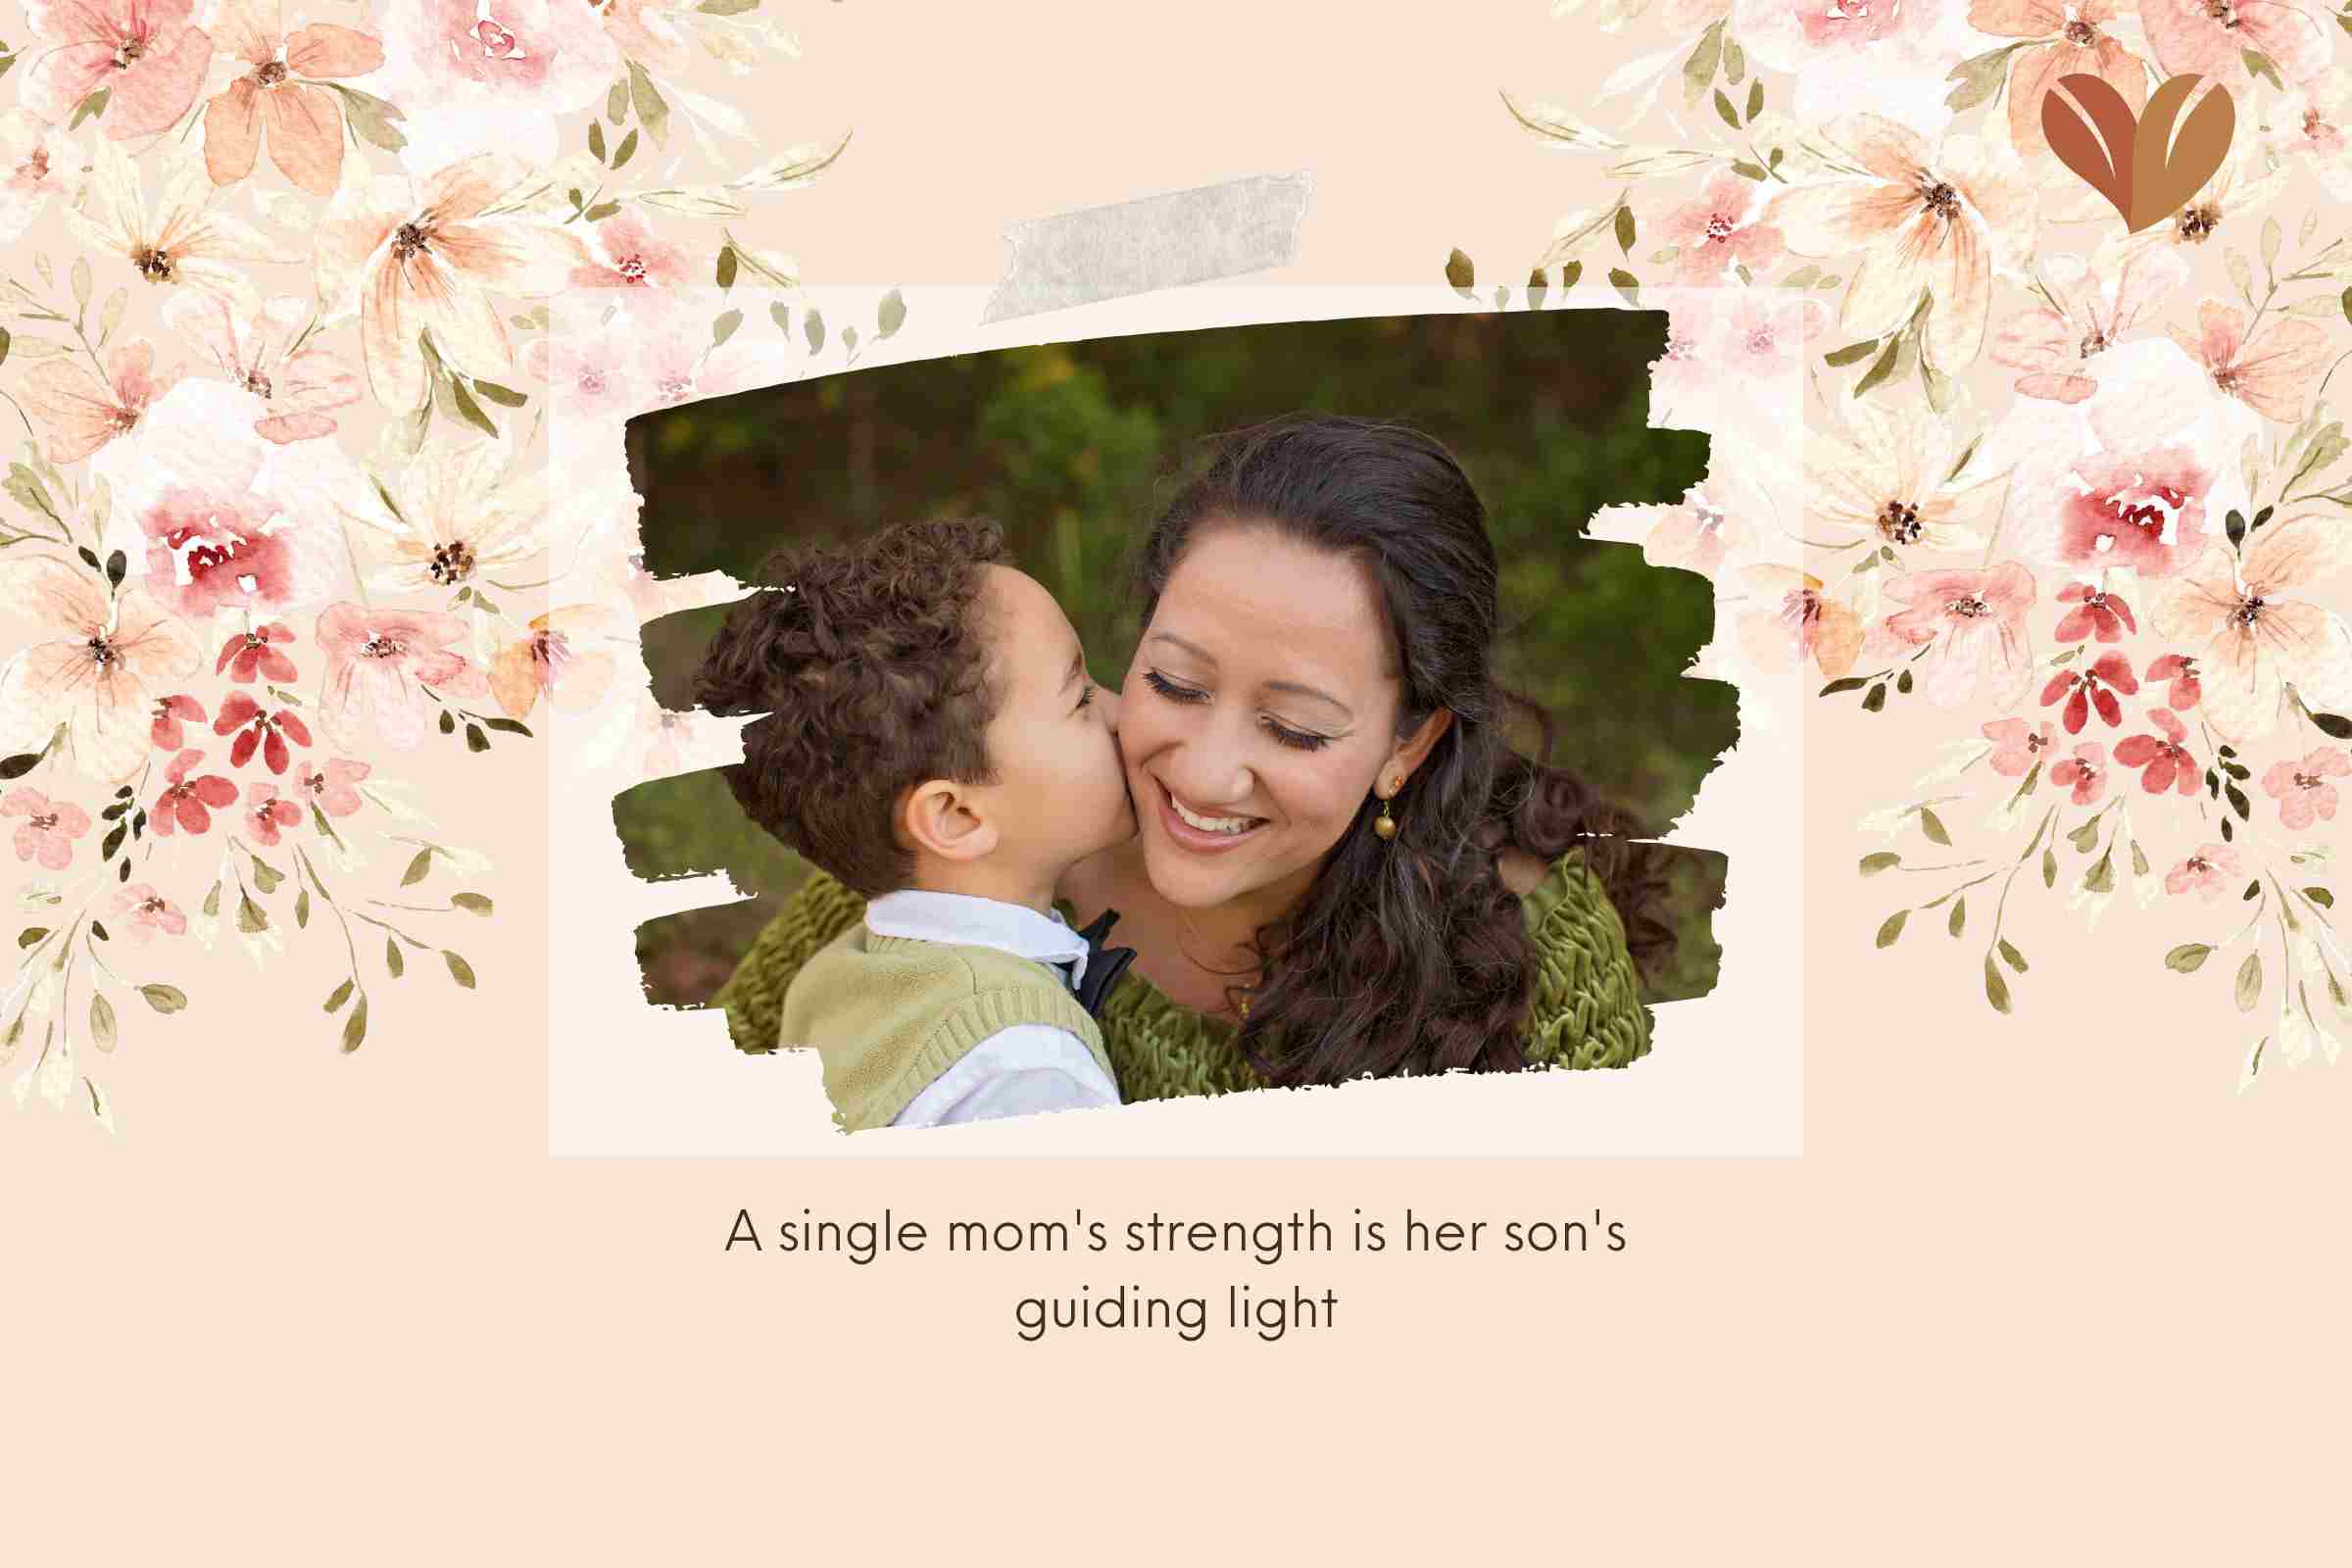 Single mom quotes from son - A single mom's strength is her son's guiding light.